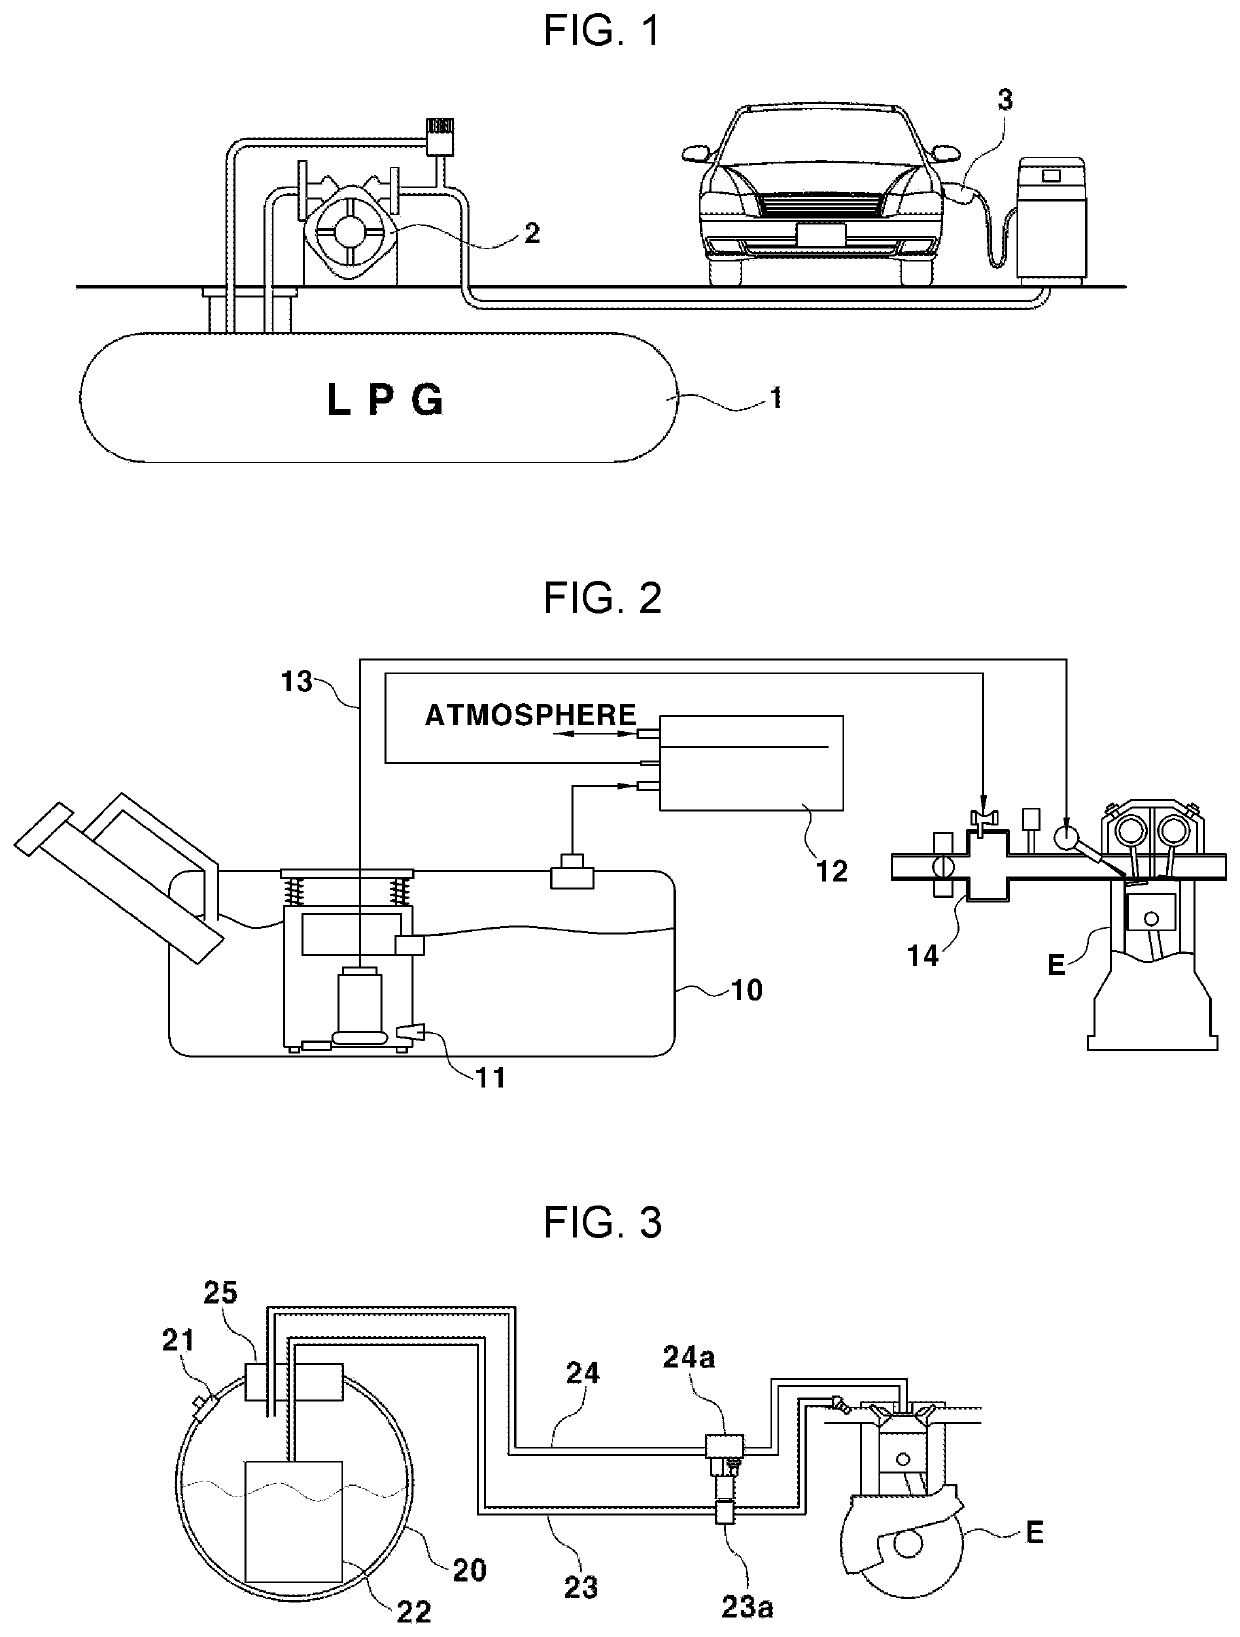 Apparatus and method for charging LPG fuel of bi-fuel vehicle